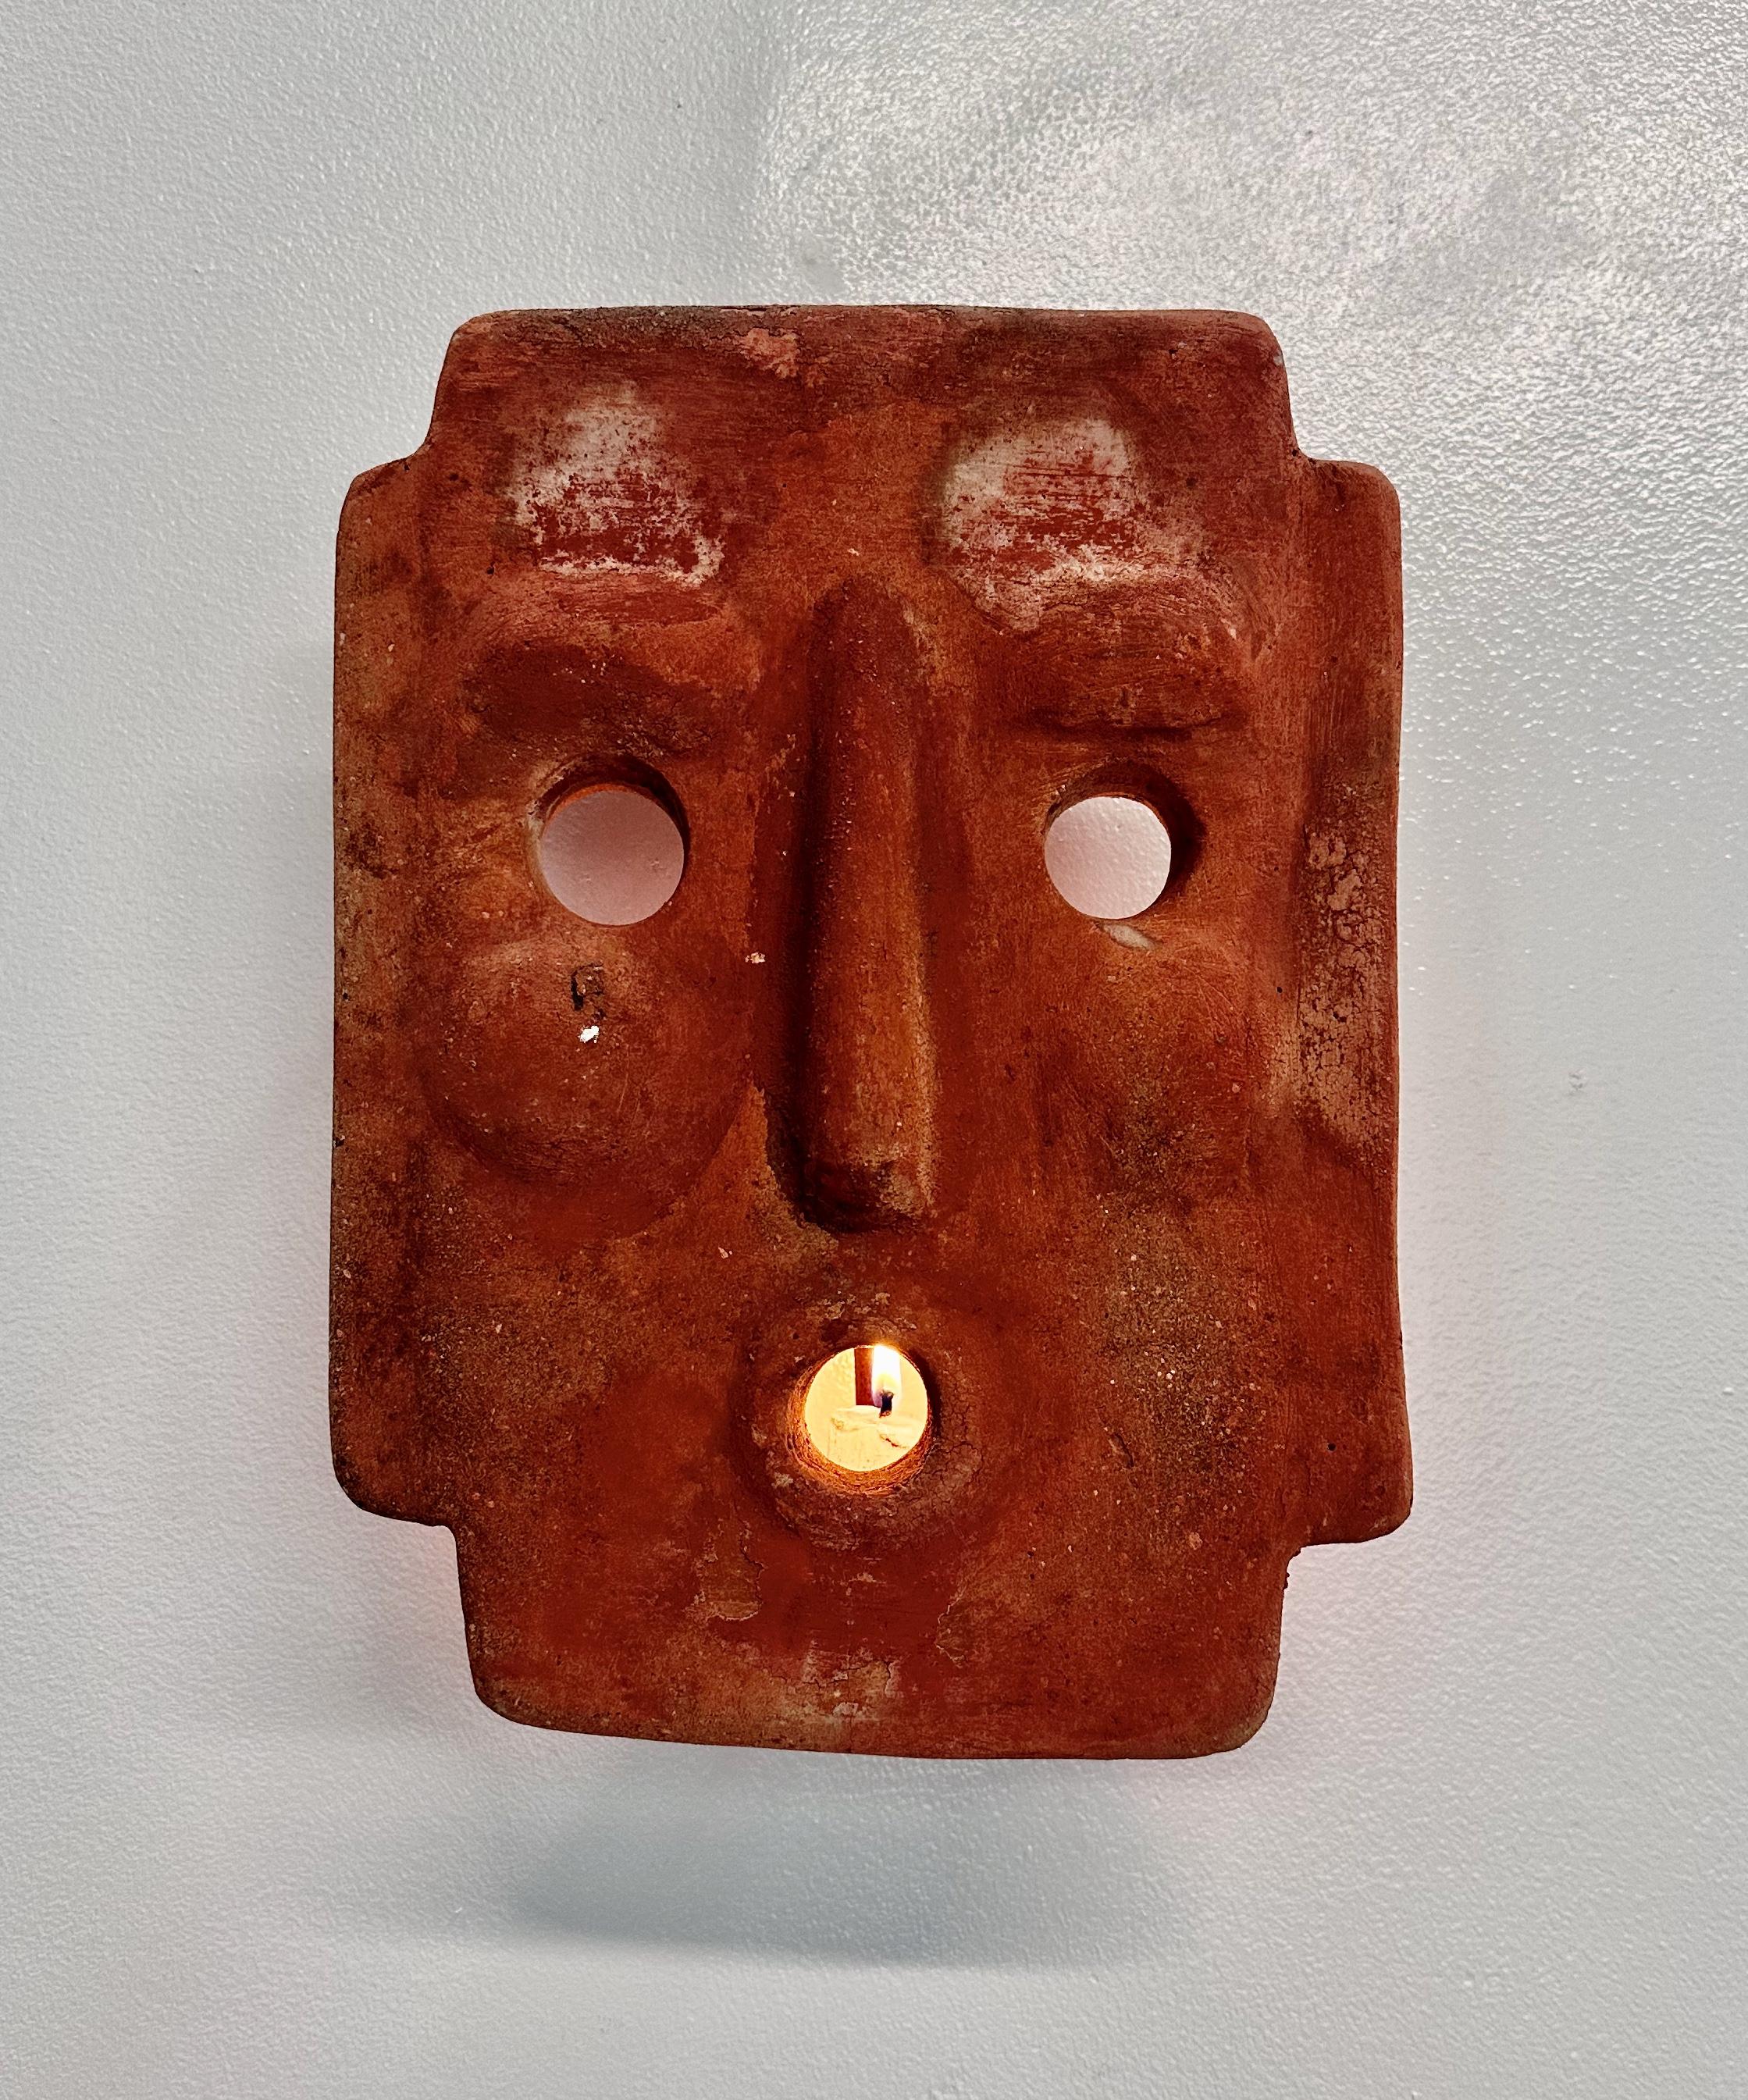 This handcrafted Italian Terracotta Mask Candle Sconce is a stunning addition to any outdoor space. Made with traditional terracotta clay and featuring a unique mask design, it brings a touch of Italian charm and authenticity to your home. The